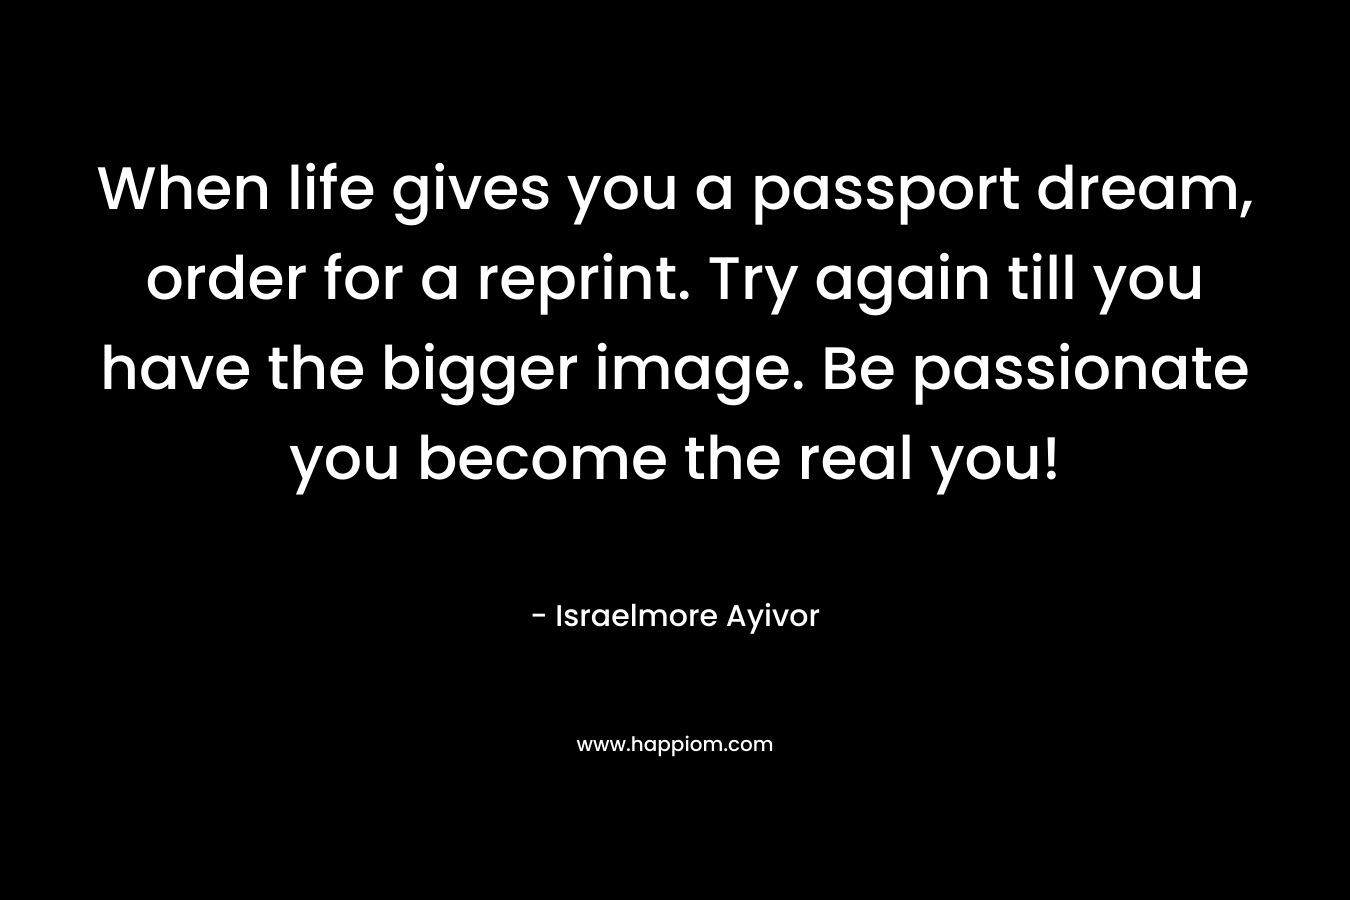 When life gives you a passport dream, order for a reprint. Try again till you have the bigger image. Be passionate you become the real you! – Israelmore Ayivor